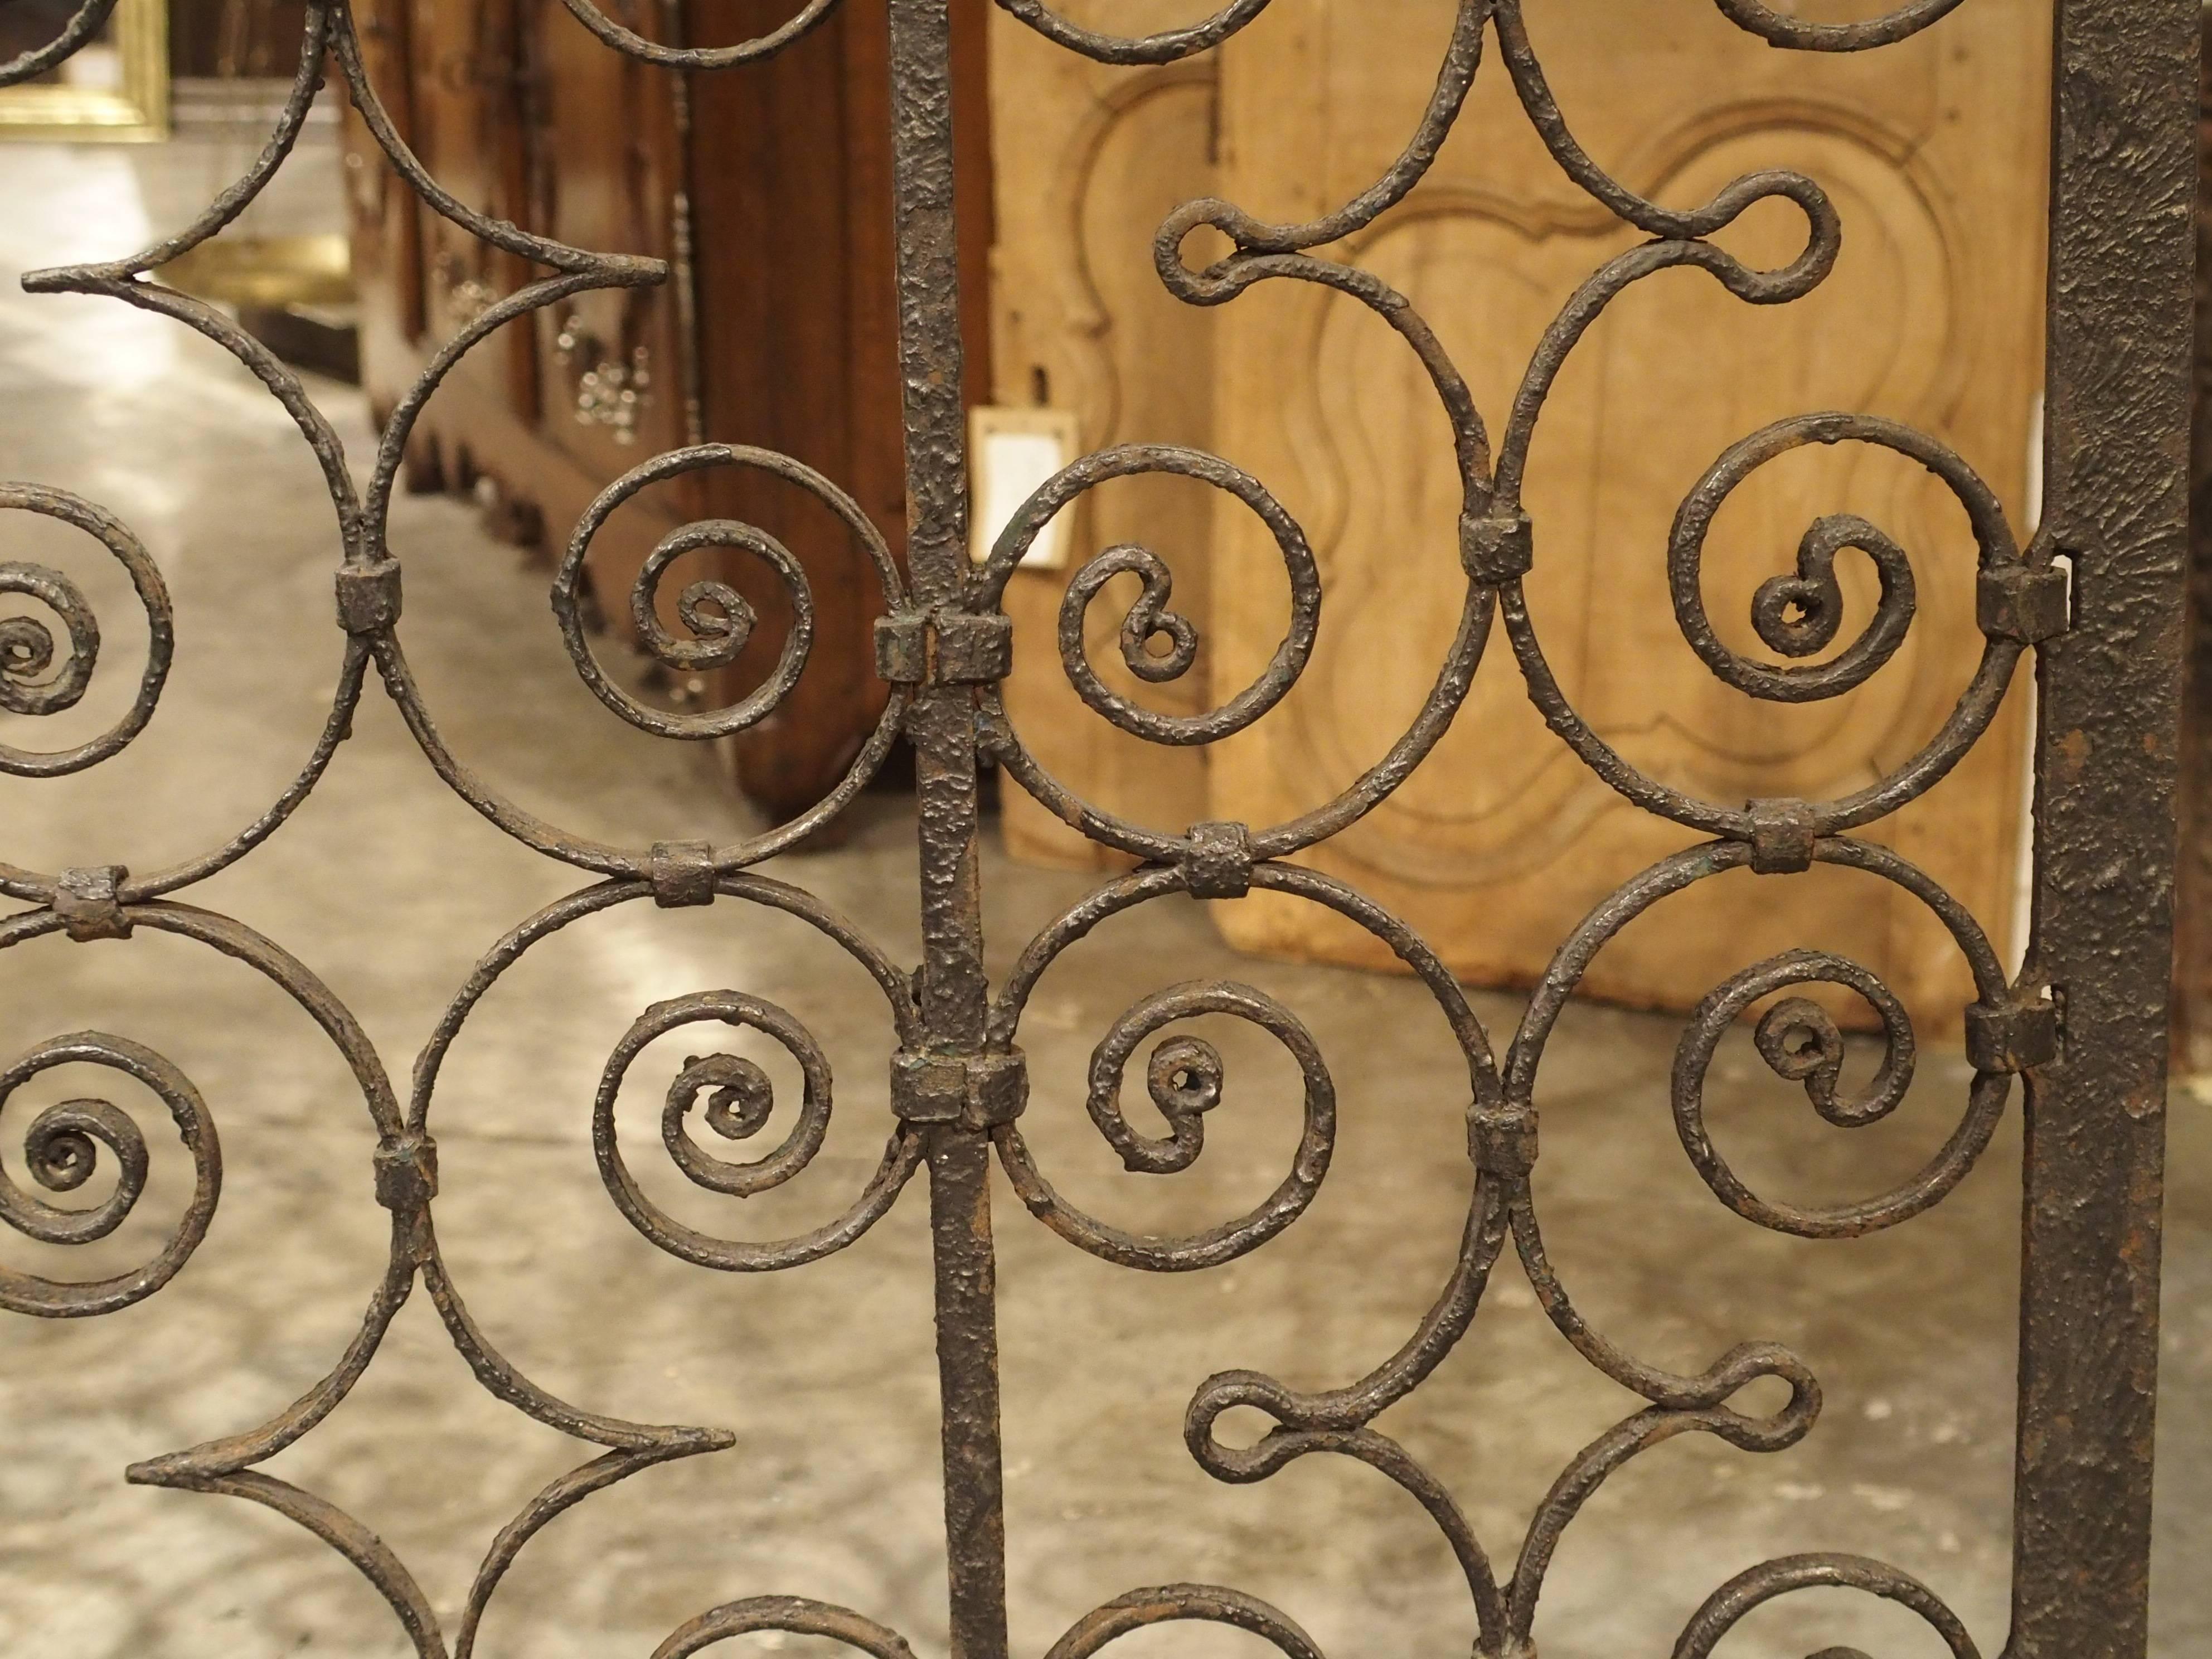 French Pair of Scrolled Forged Iron Gates from France, 1800s